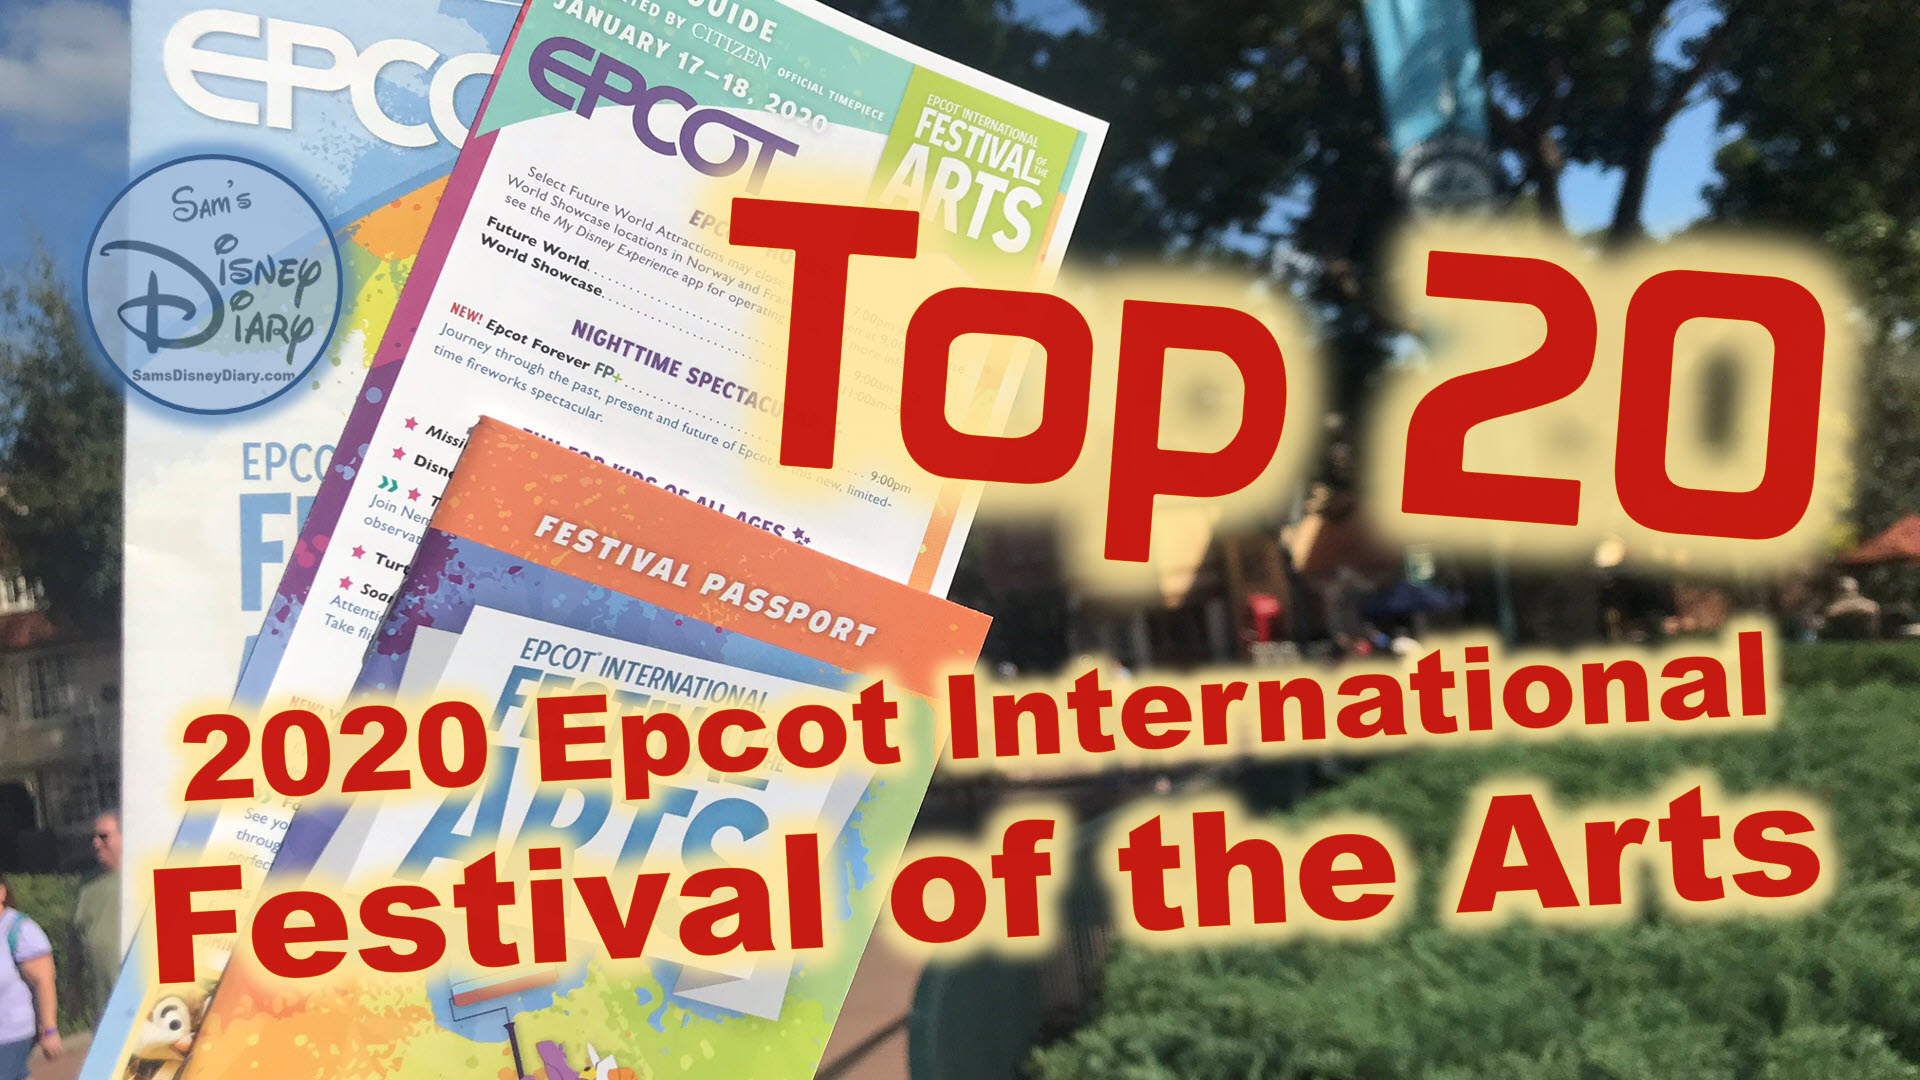 Epcot Internal Festival of the Arts 2020 - The Top 20 Things you need to do.